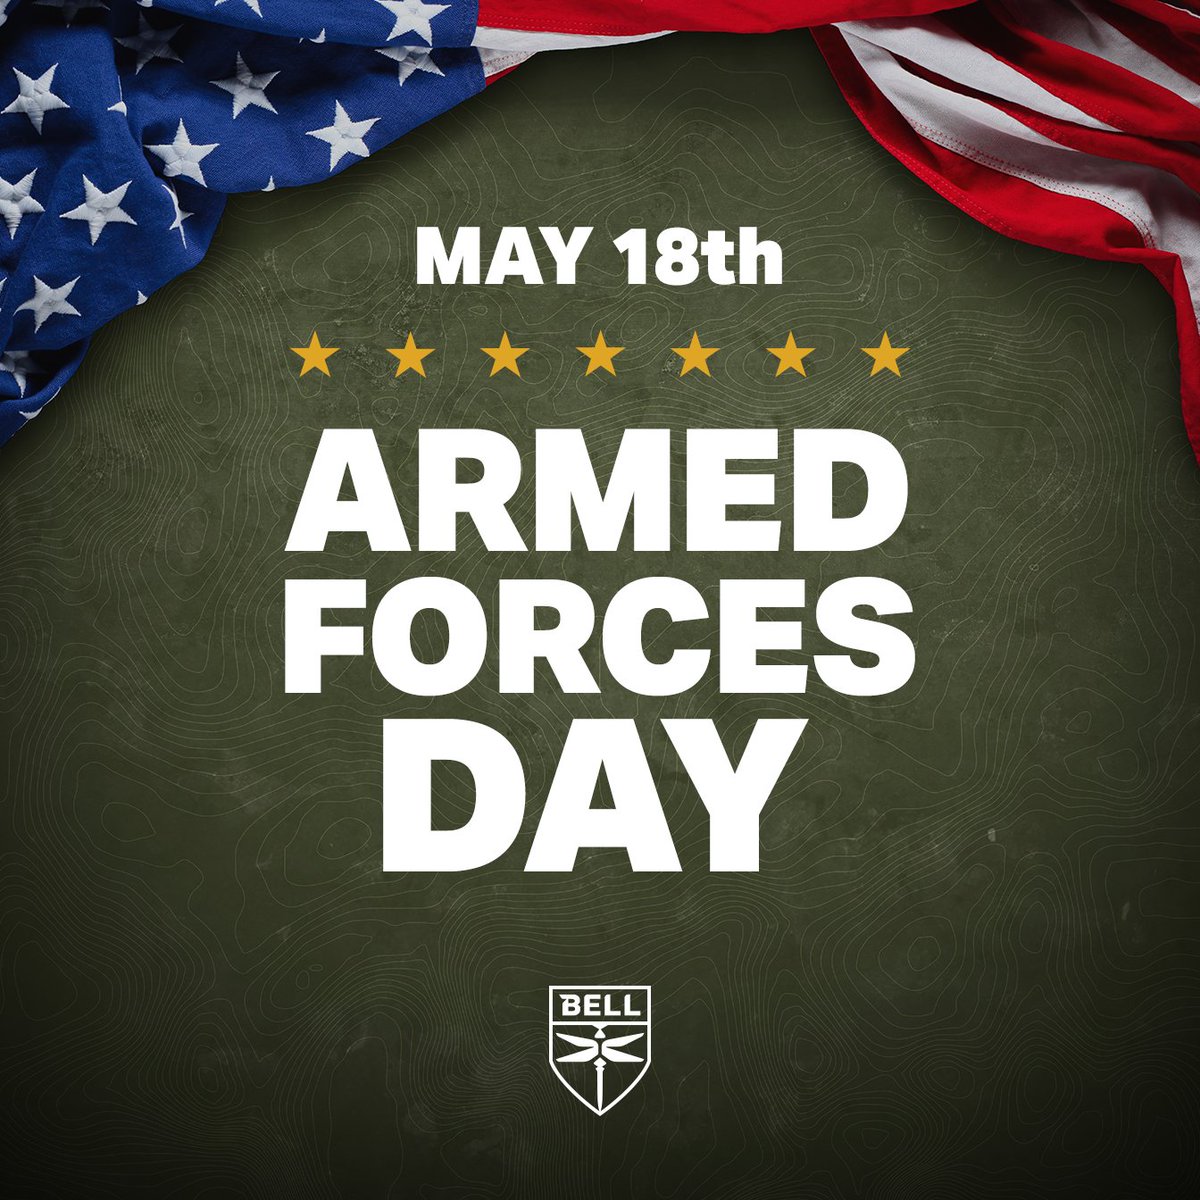 Happy #ArmedForcesDay! Today, Bell honors and salutes the fearless men and women who protect our country. Thank you for your service!